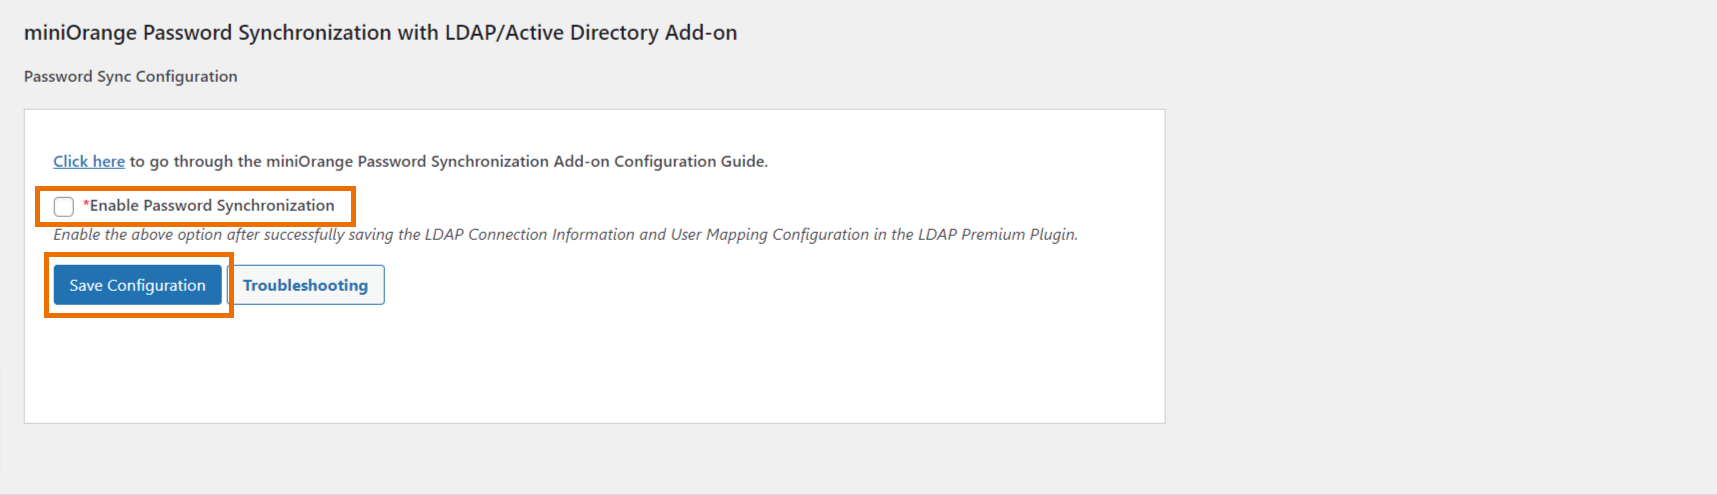 Password Sync with LDAP/Active Directory Add-On Configuration enable it to enable wp to ldap password sync